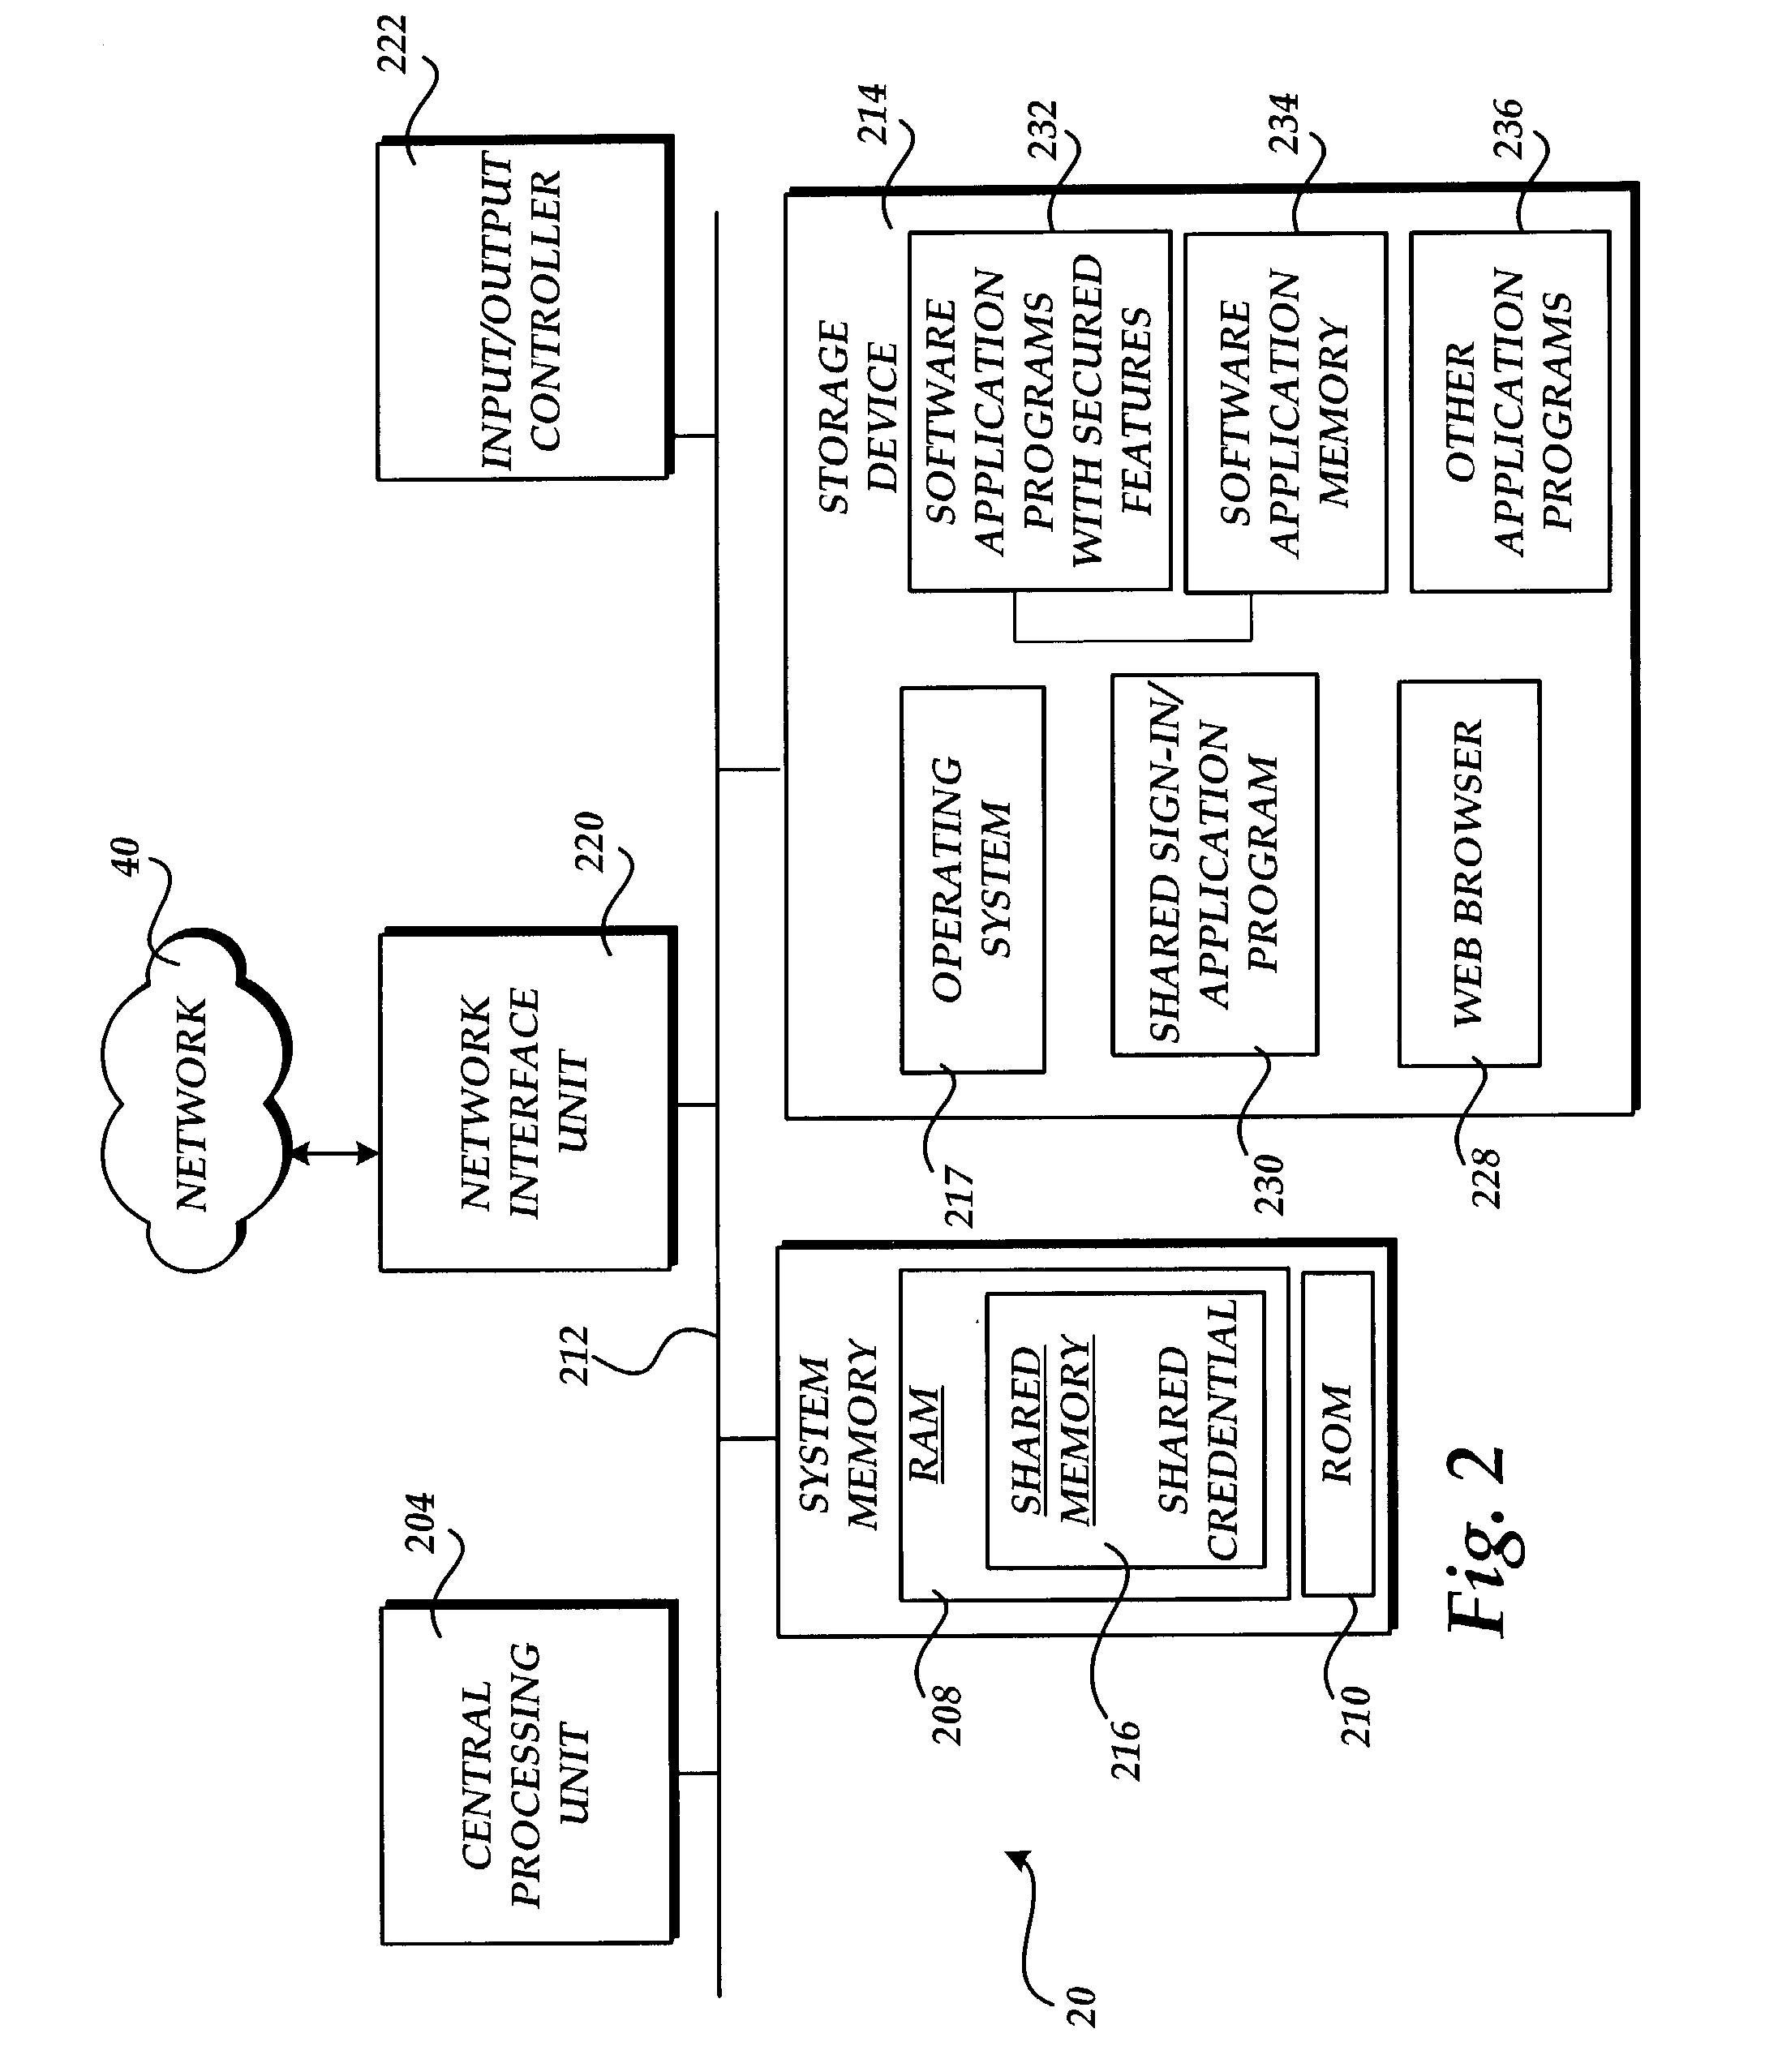 Sharing a sign-in among software applications having secured features